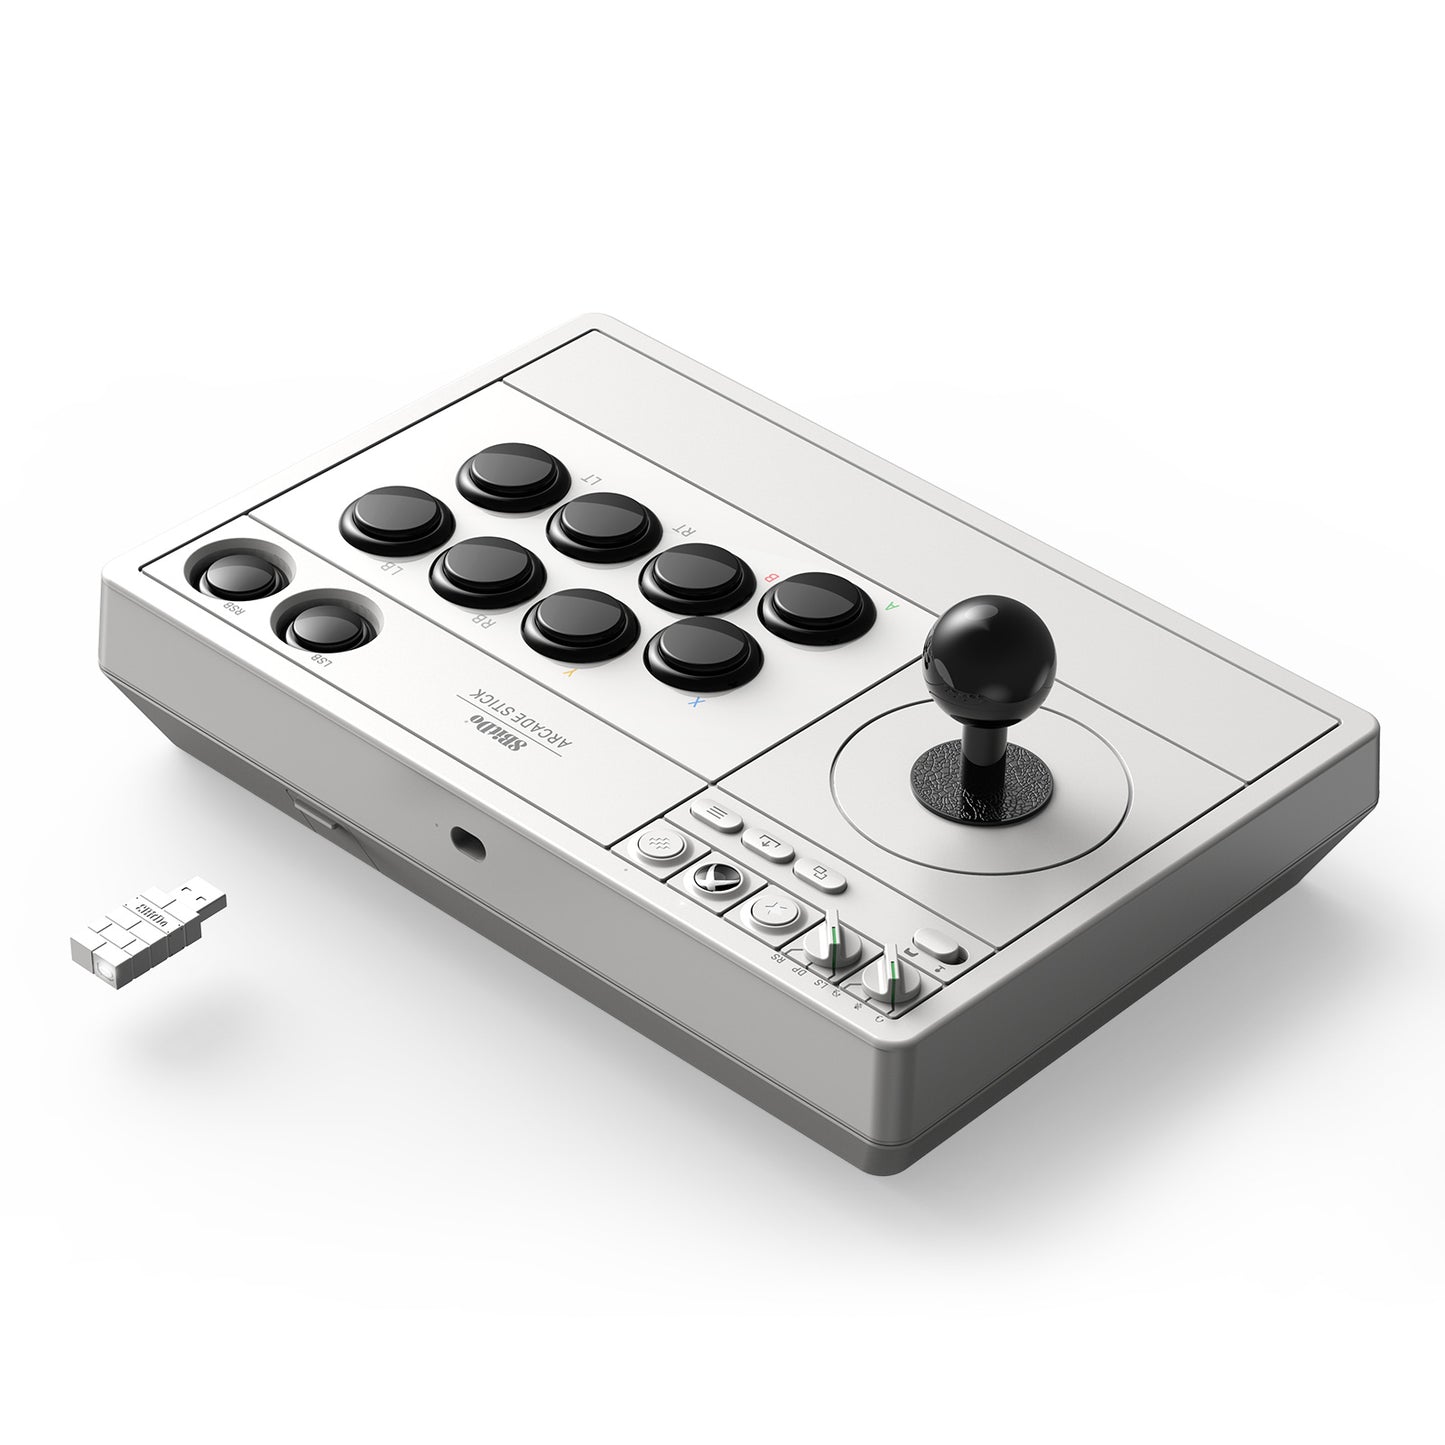 8BitDo is making a customizable arcade stick for Switch and PC players